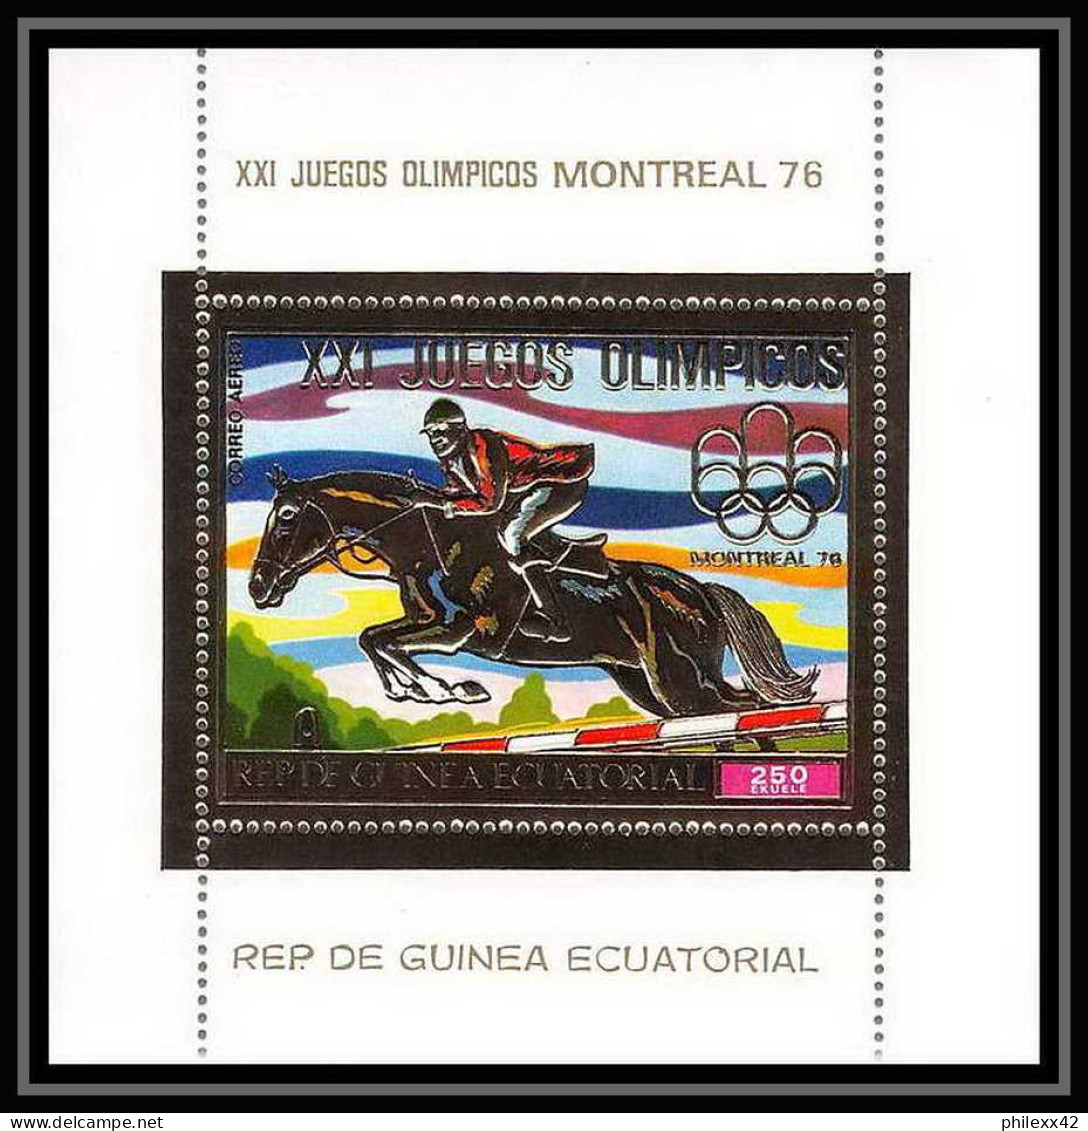 198 Guinée équatoriale Guinea Bloc N°225 OR Gold Stamps Jeux Olympiques Olympic Games 1976 Montreal Jumping Cheval - Springconcours